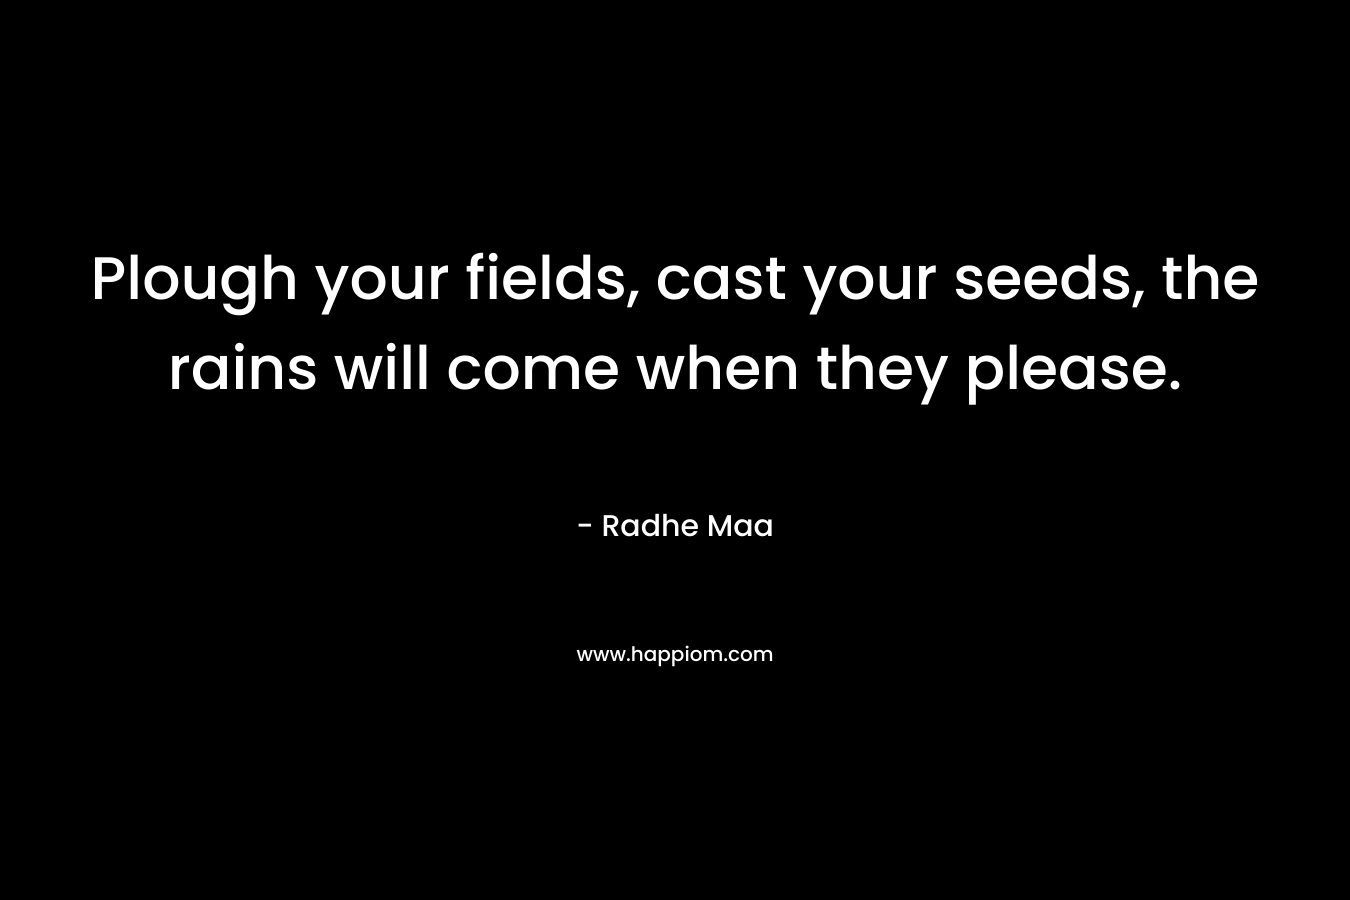 Plough your fields, cast your seeds, the rains will come when they please.